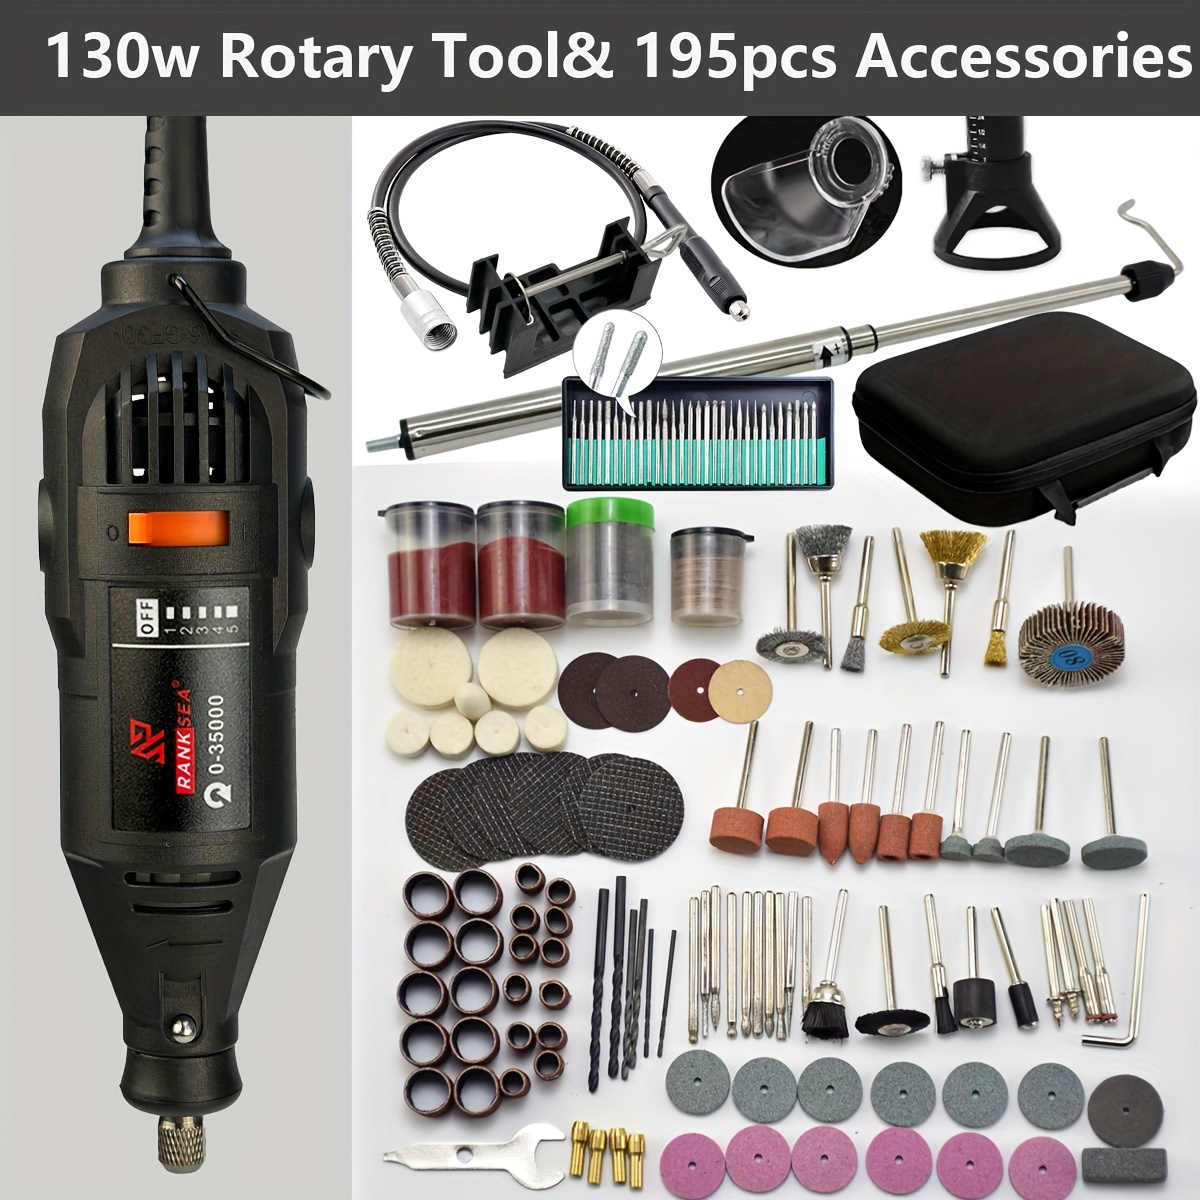 

25/28/43/105pcs Rotary Tool Kit, Speed Adjustments 8000-30000rpm, Equipped With Flex Shaft And Multifunctional Chuck, 43 Accessories, Power Multipurpose Set For Craft Projects And Diy Creations